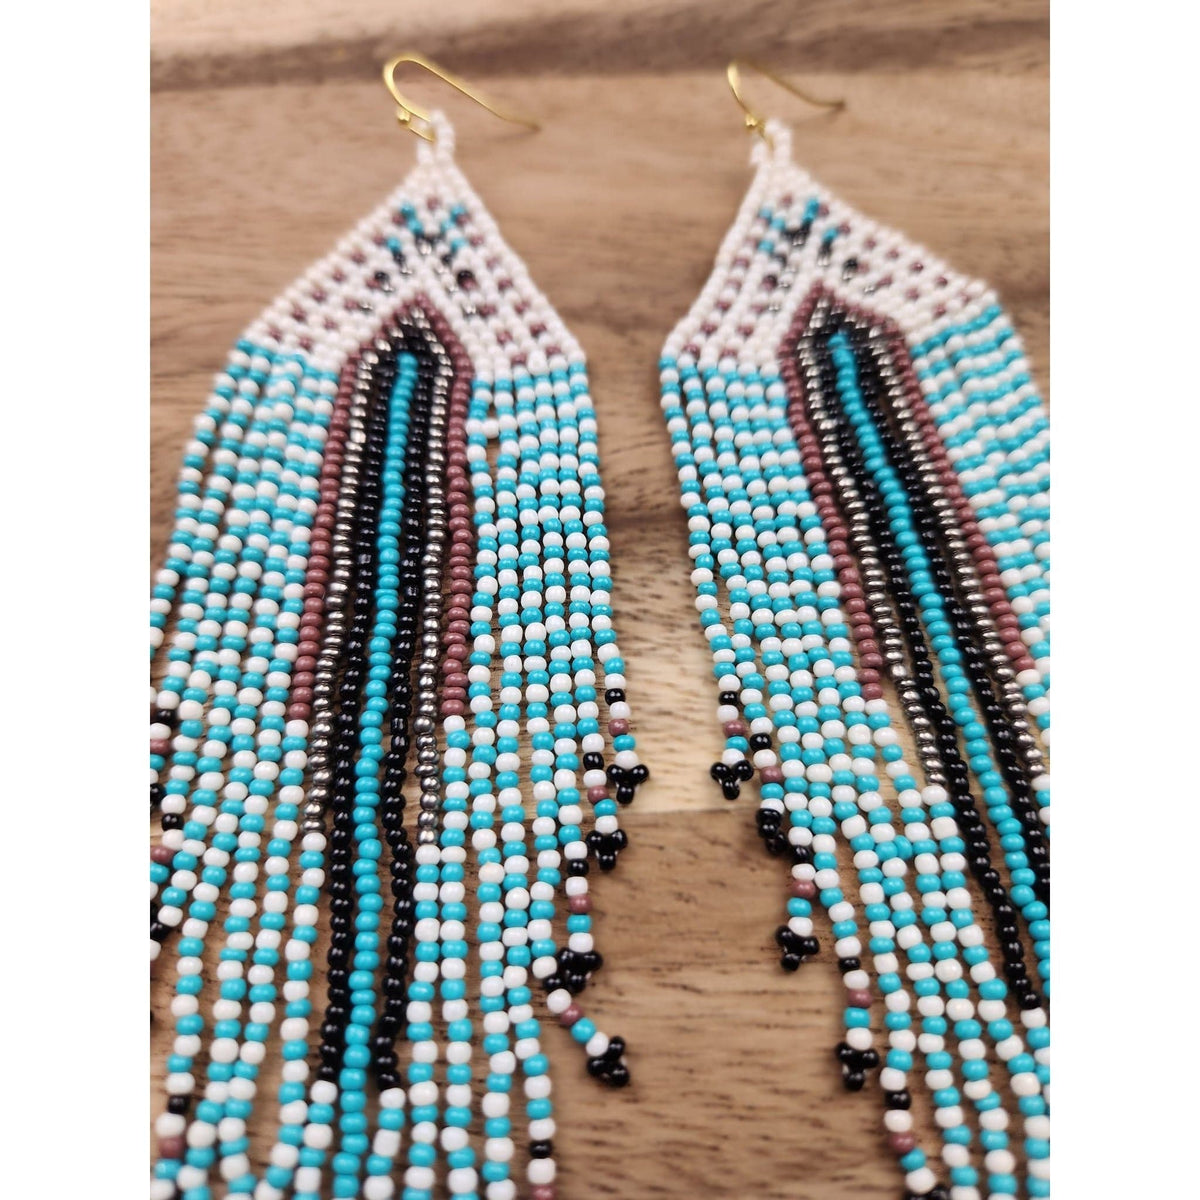 Southern Breeze Fringe Beaded Earrings Beaded Earrings TheFringeCultureCollective